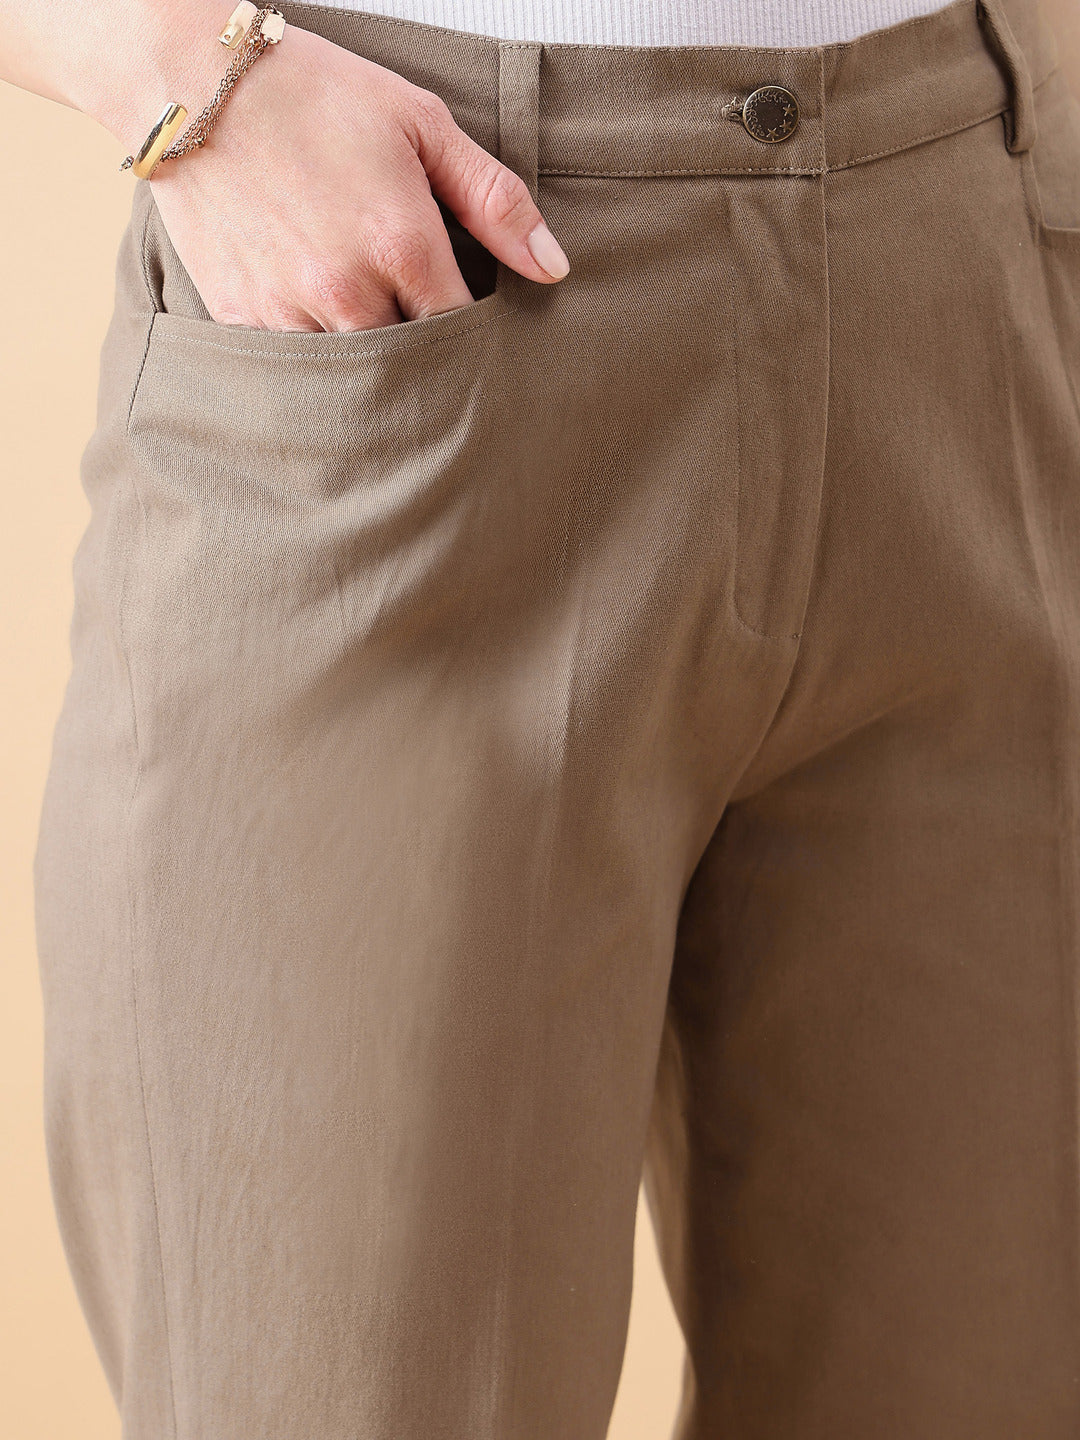 Stretch Straight Trouser - Slate Brown